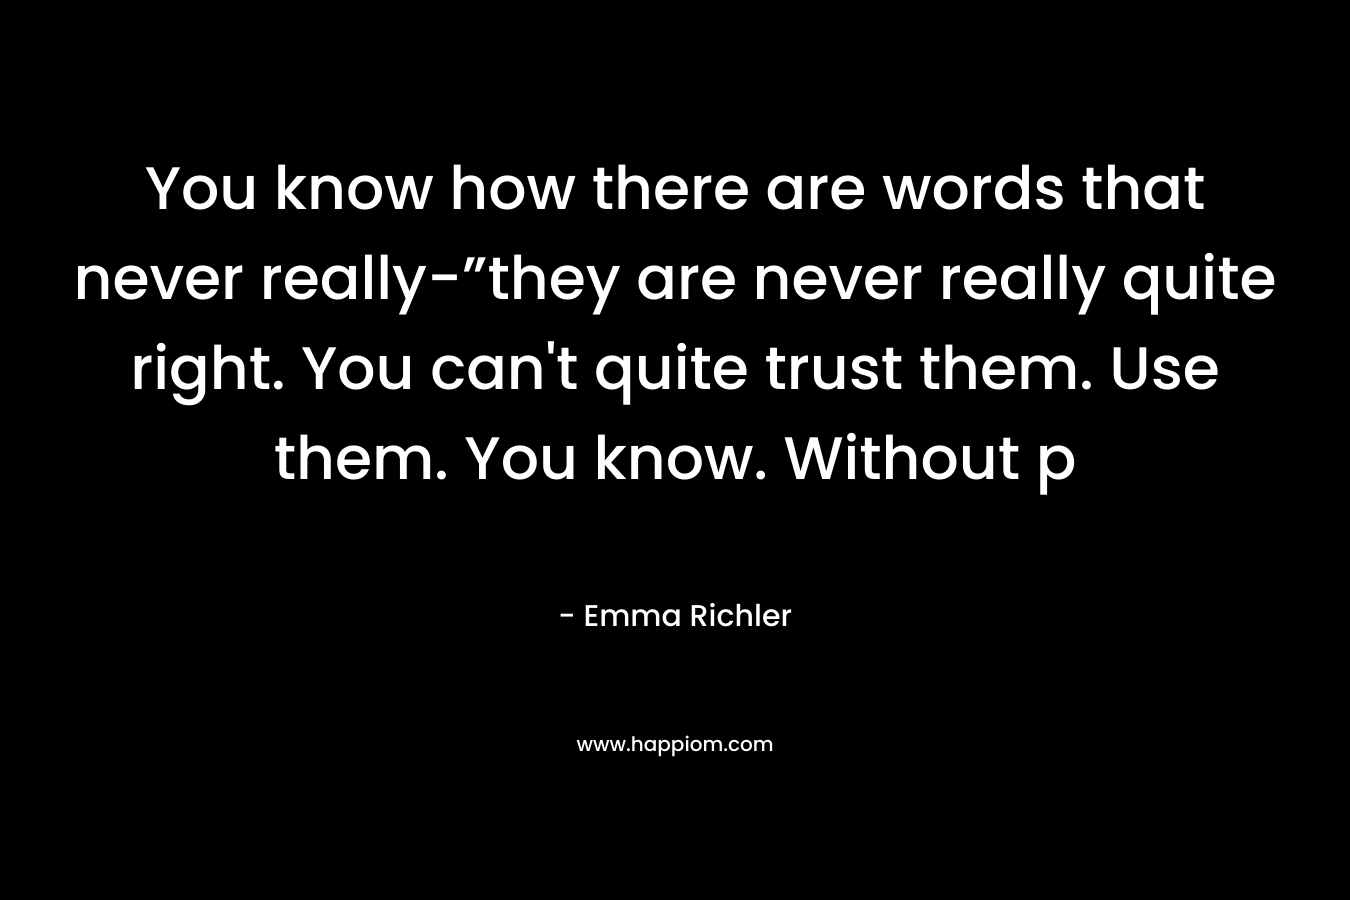 You know how there are words that never really-”they are never really quite right. You can’t quite trust them. Use them. You know. Without p – Emma Richler